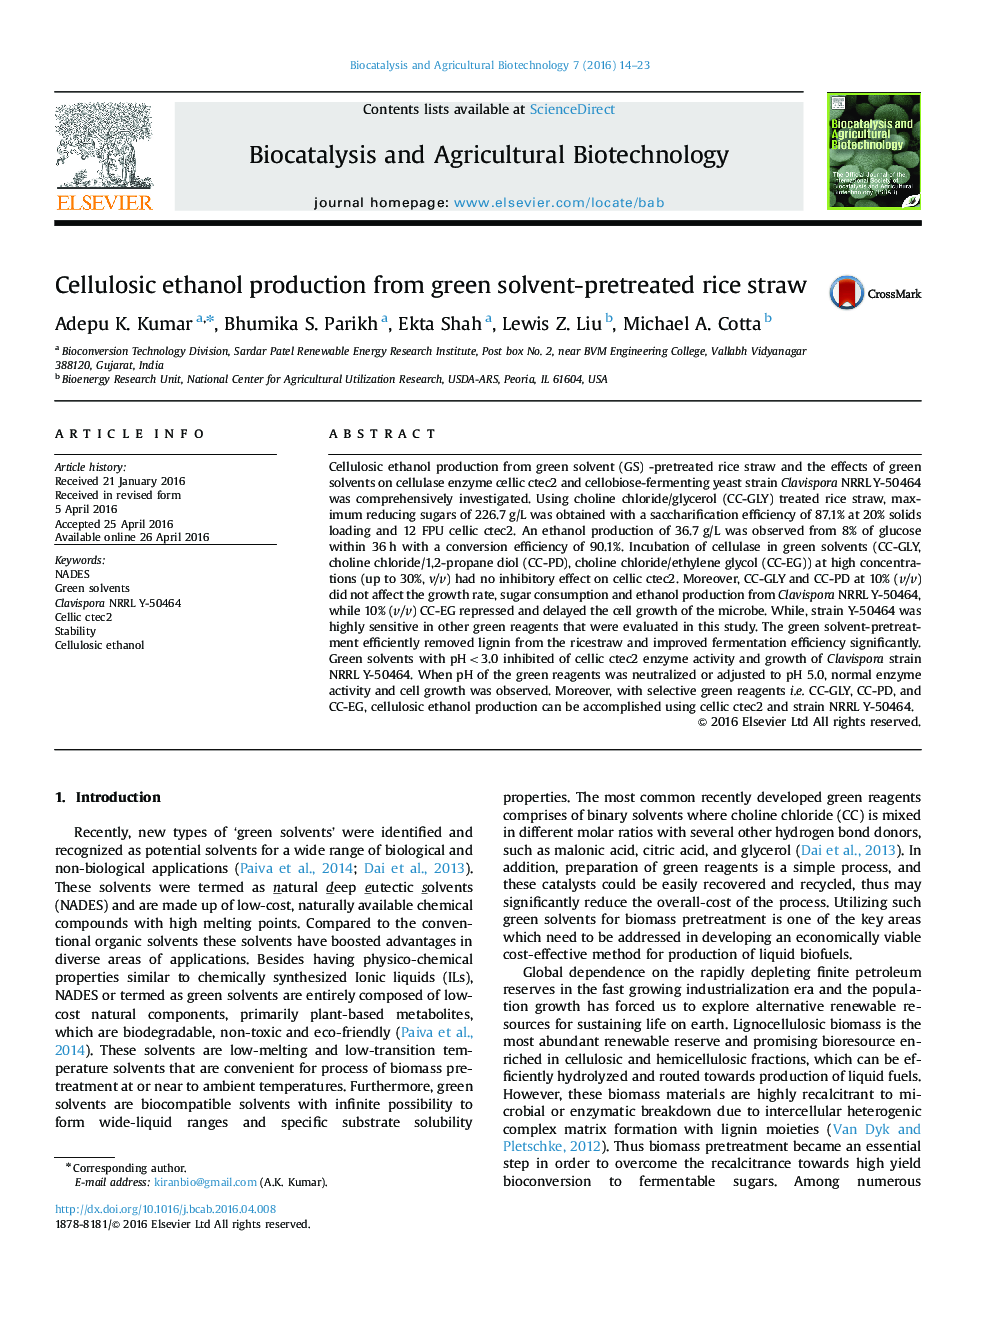 Cellulosic ethanol production from green solvent-pretreated rice straw